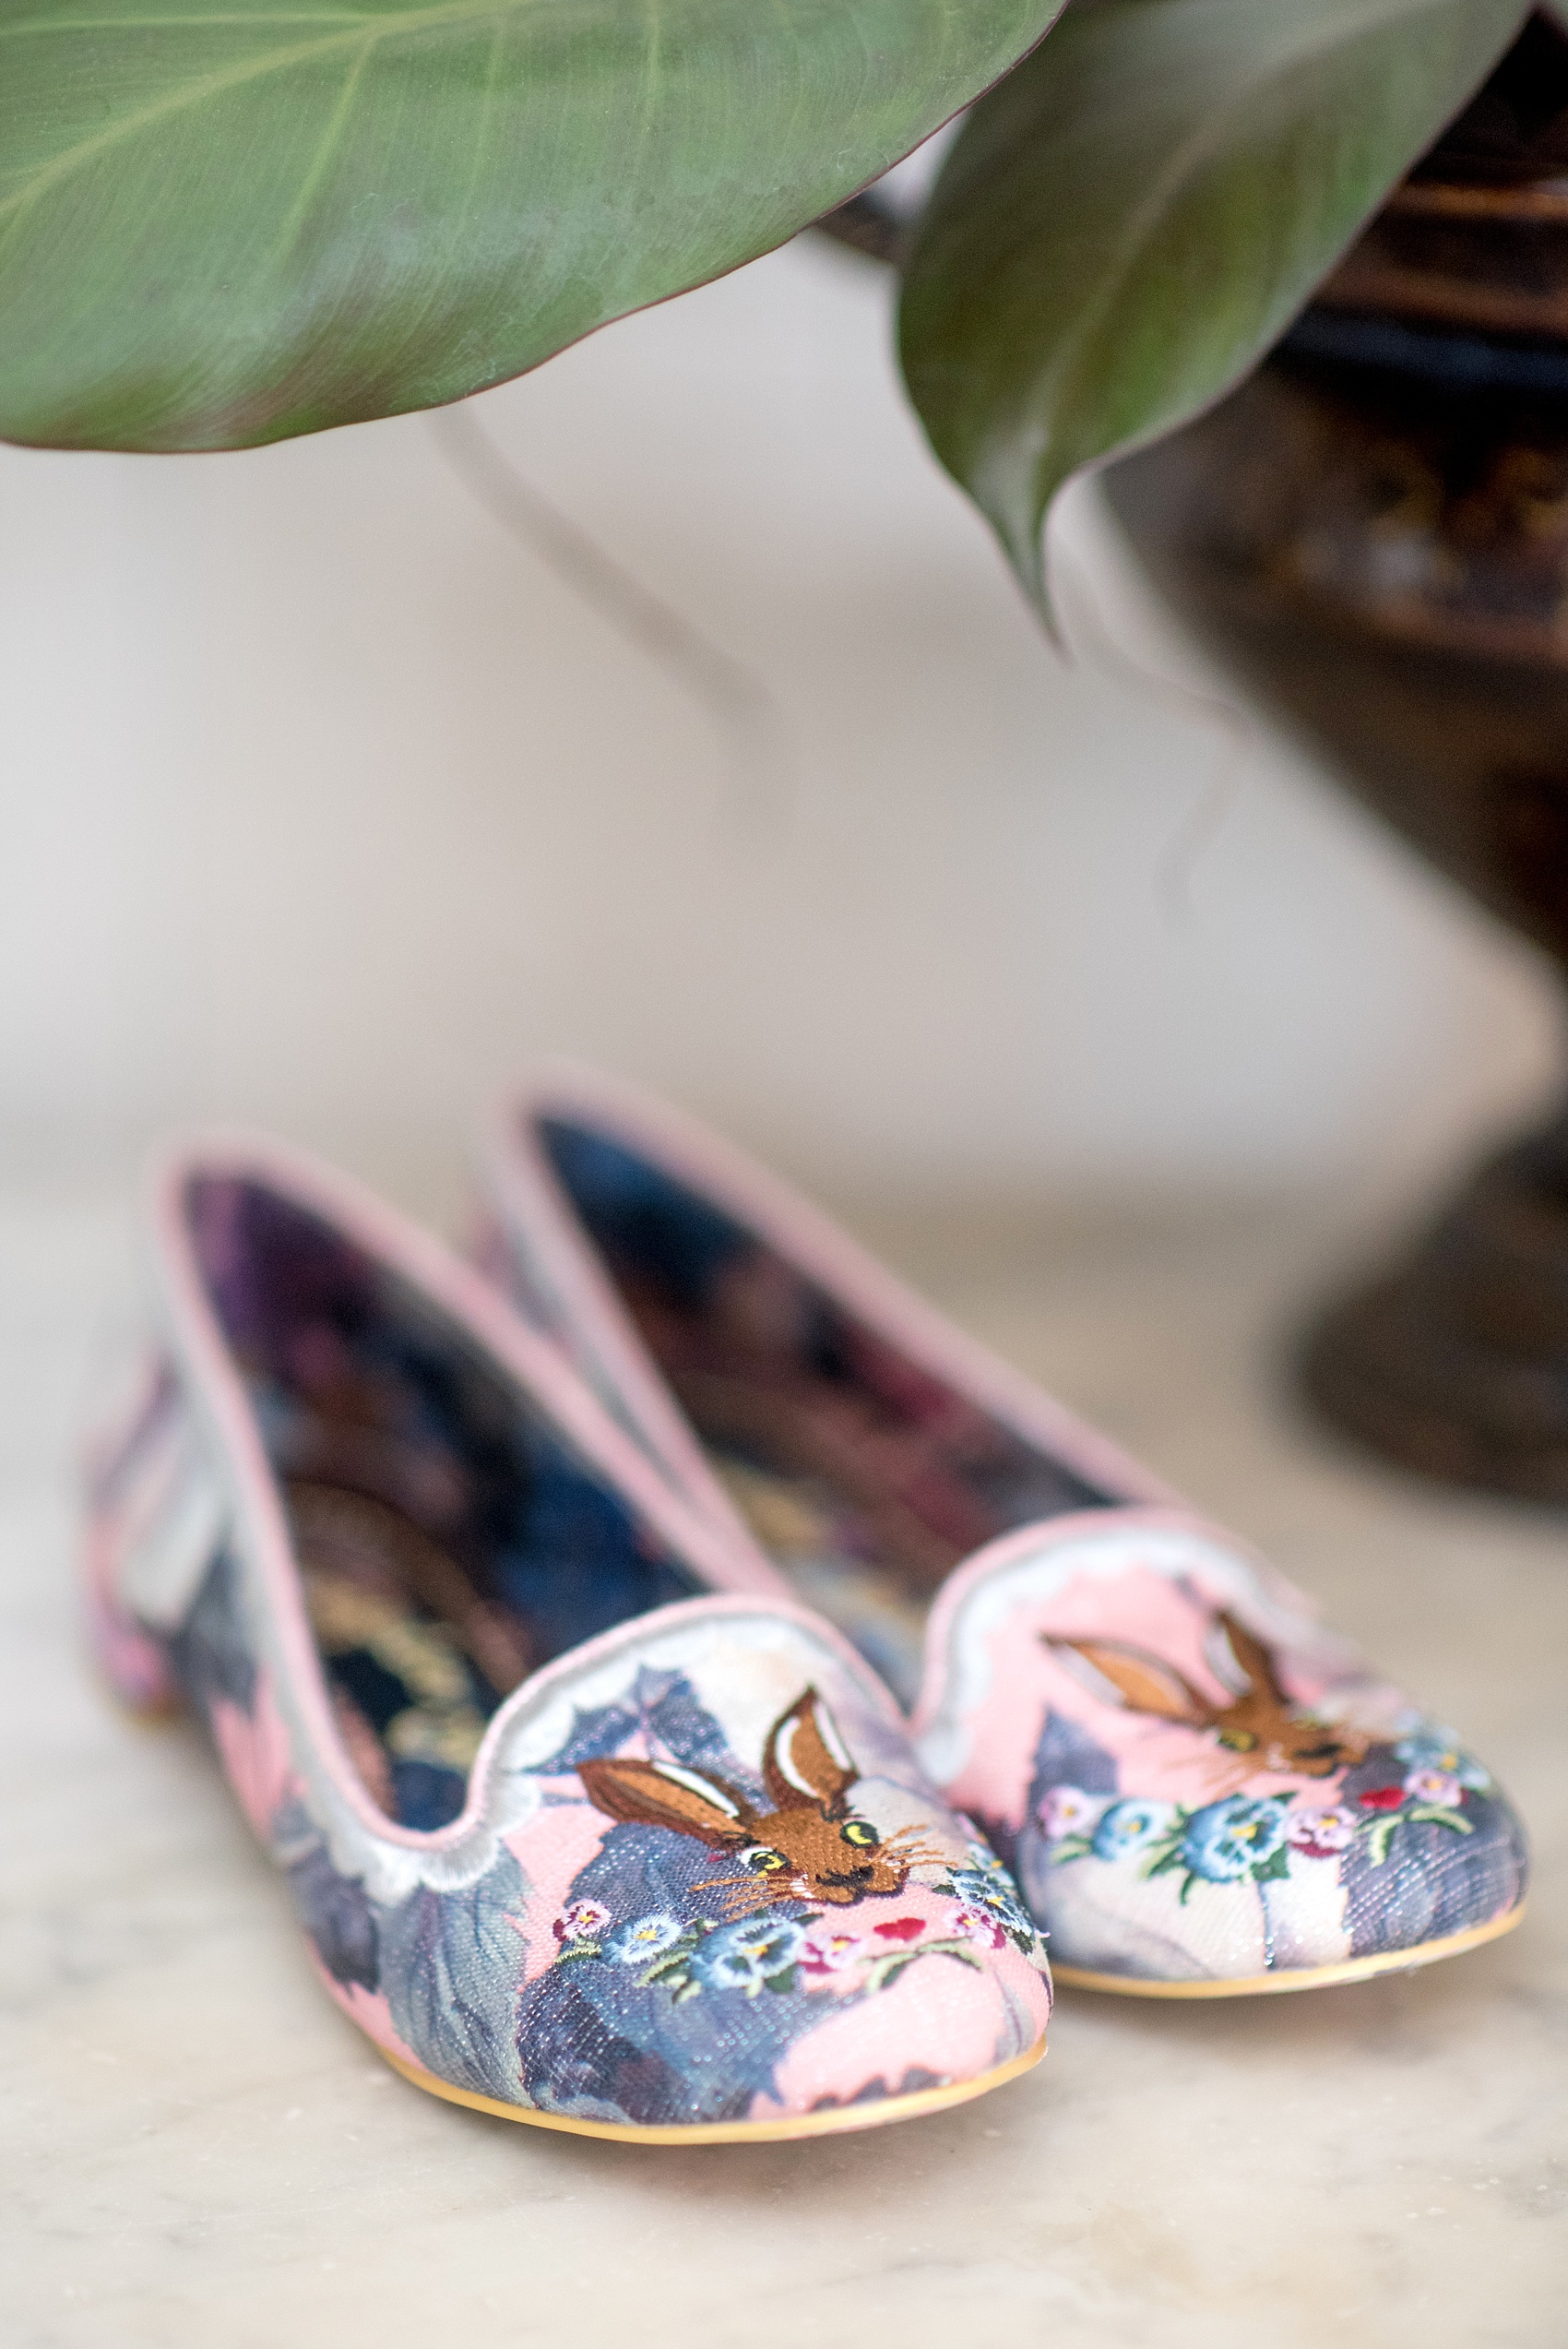 The Sutherland Wedding Photos by Mikkel Paige Photography. A detail picture of the bride's creative rabbit flat shoes.